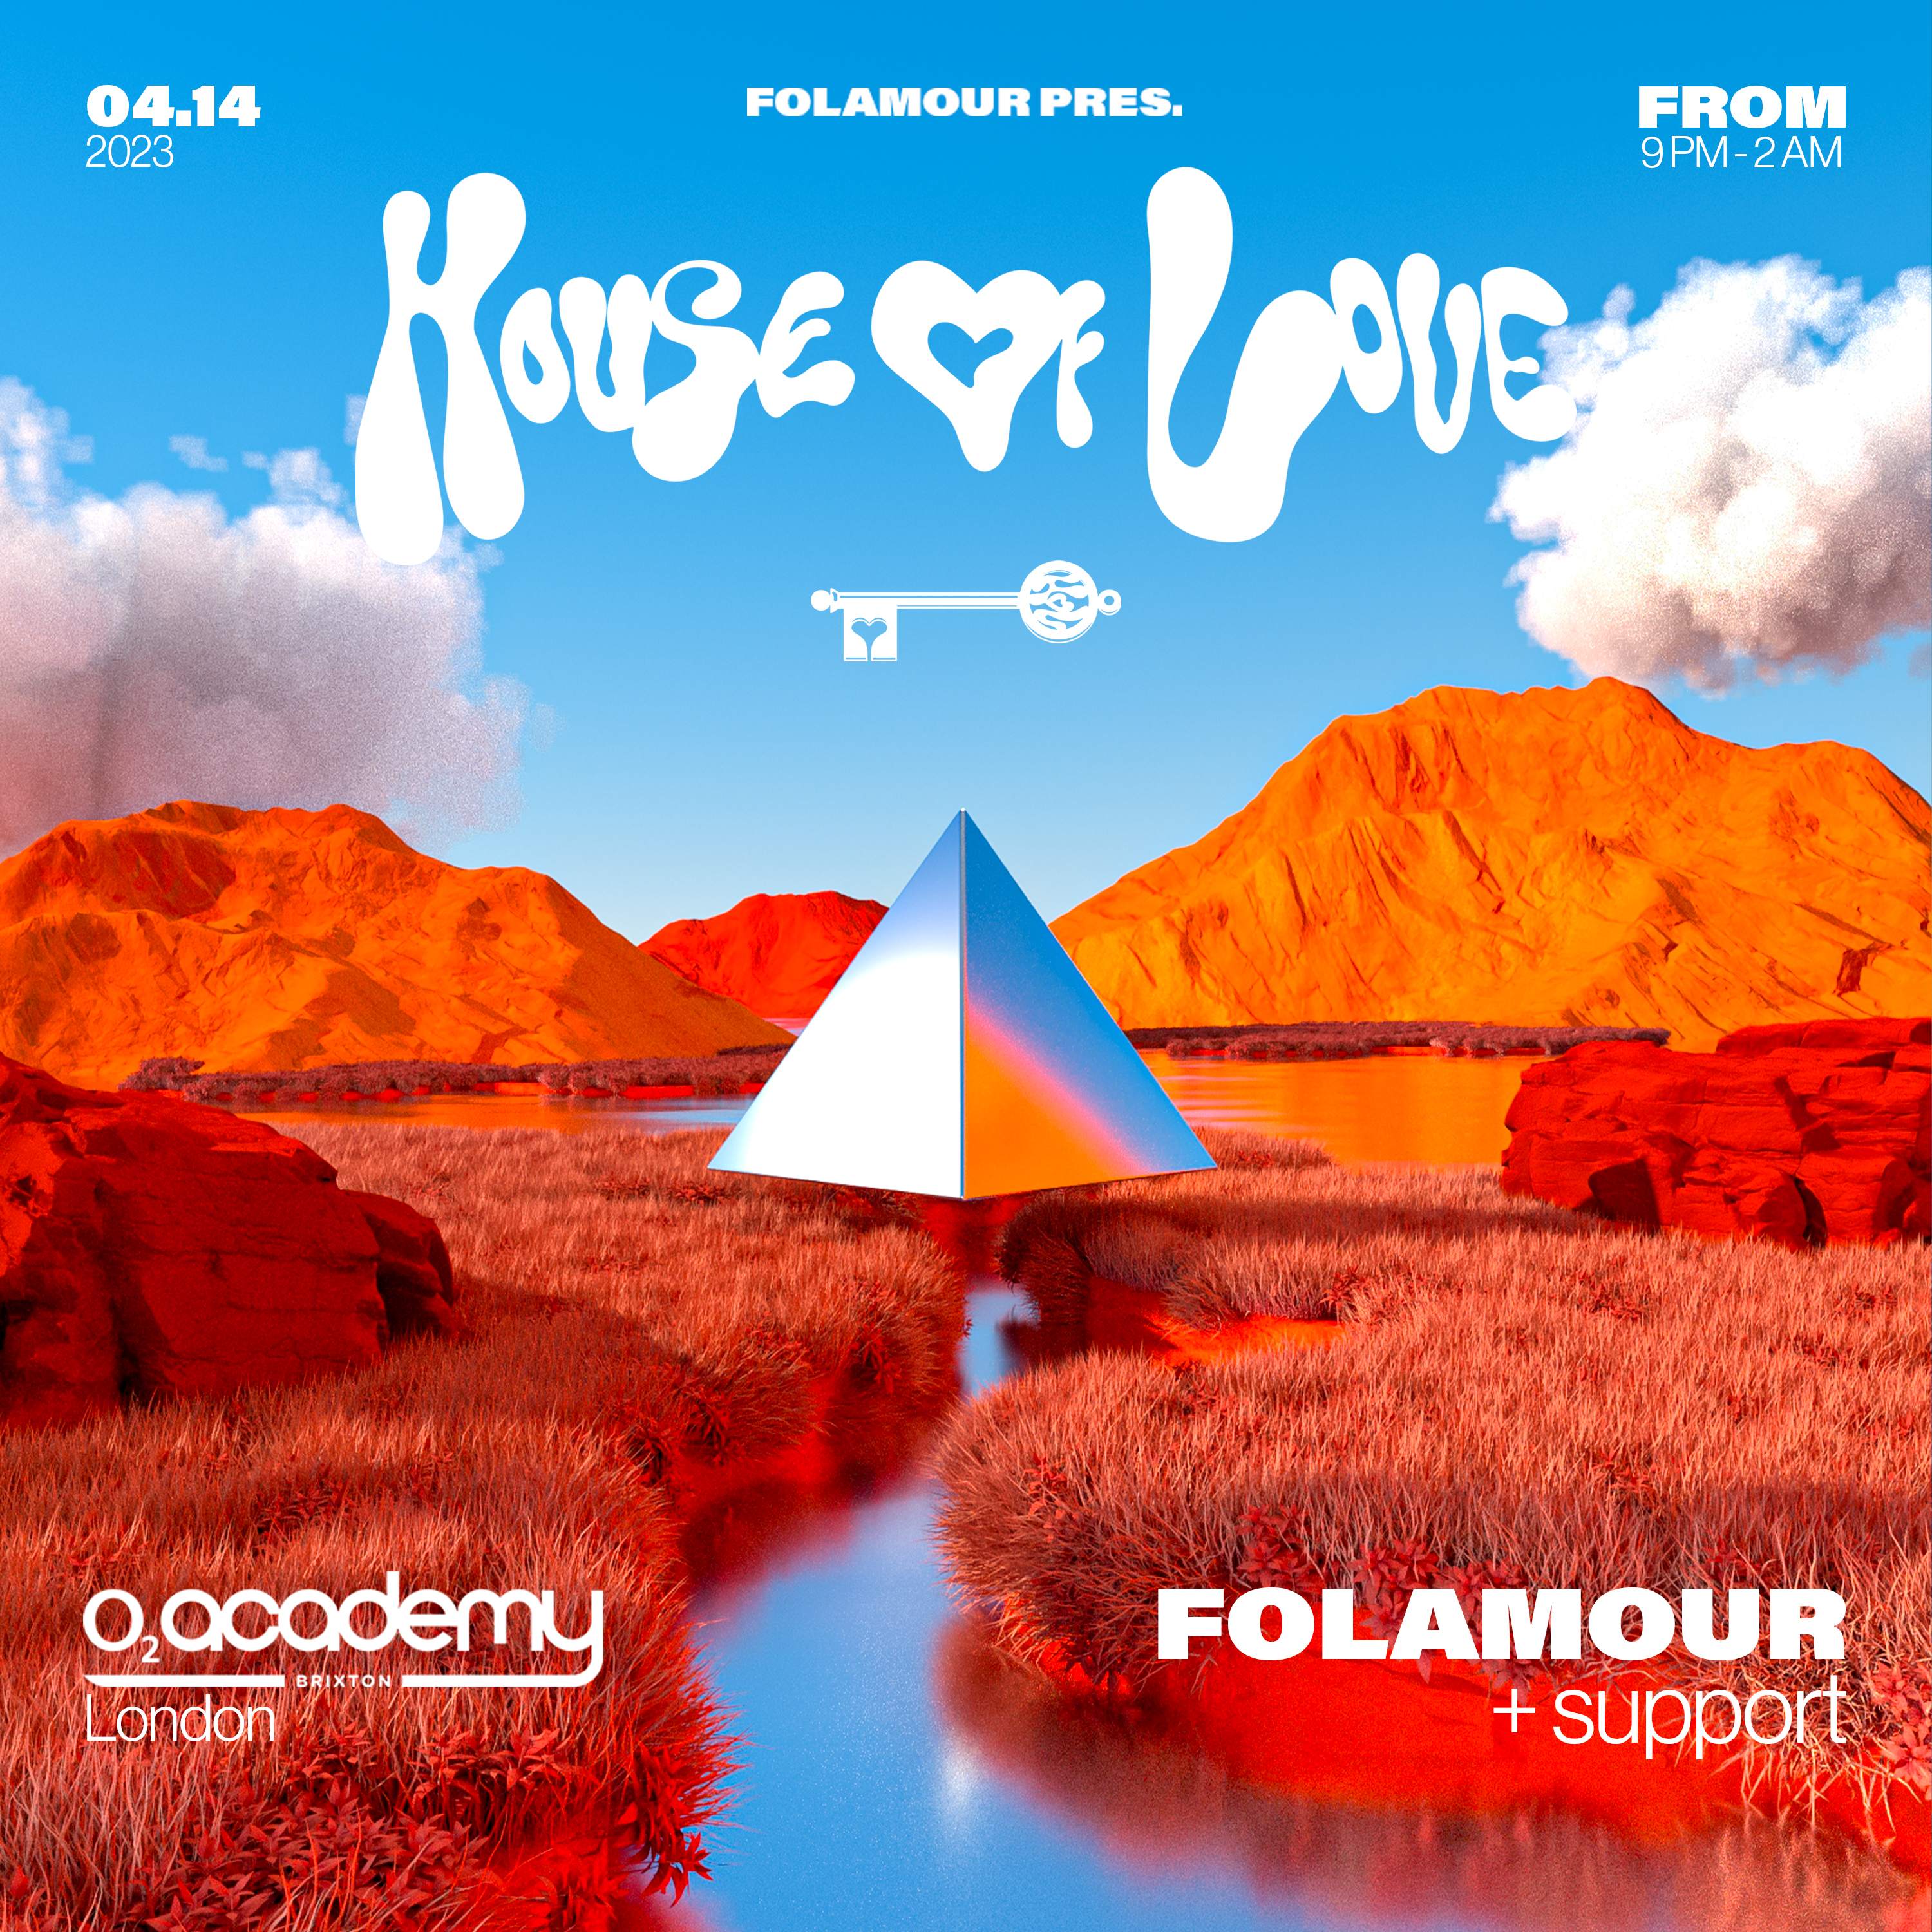 Folamour: House of Love A/V (RESCHEDULED) - フライヤー裏